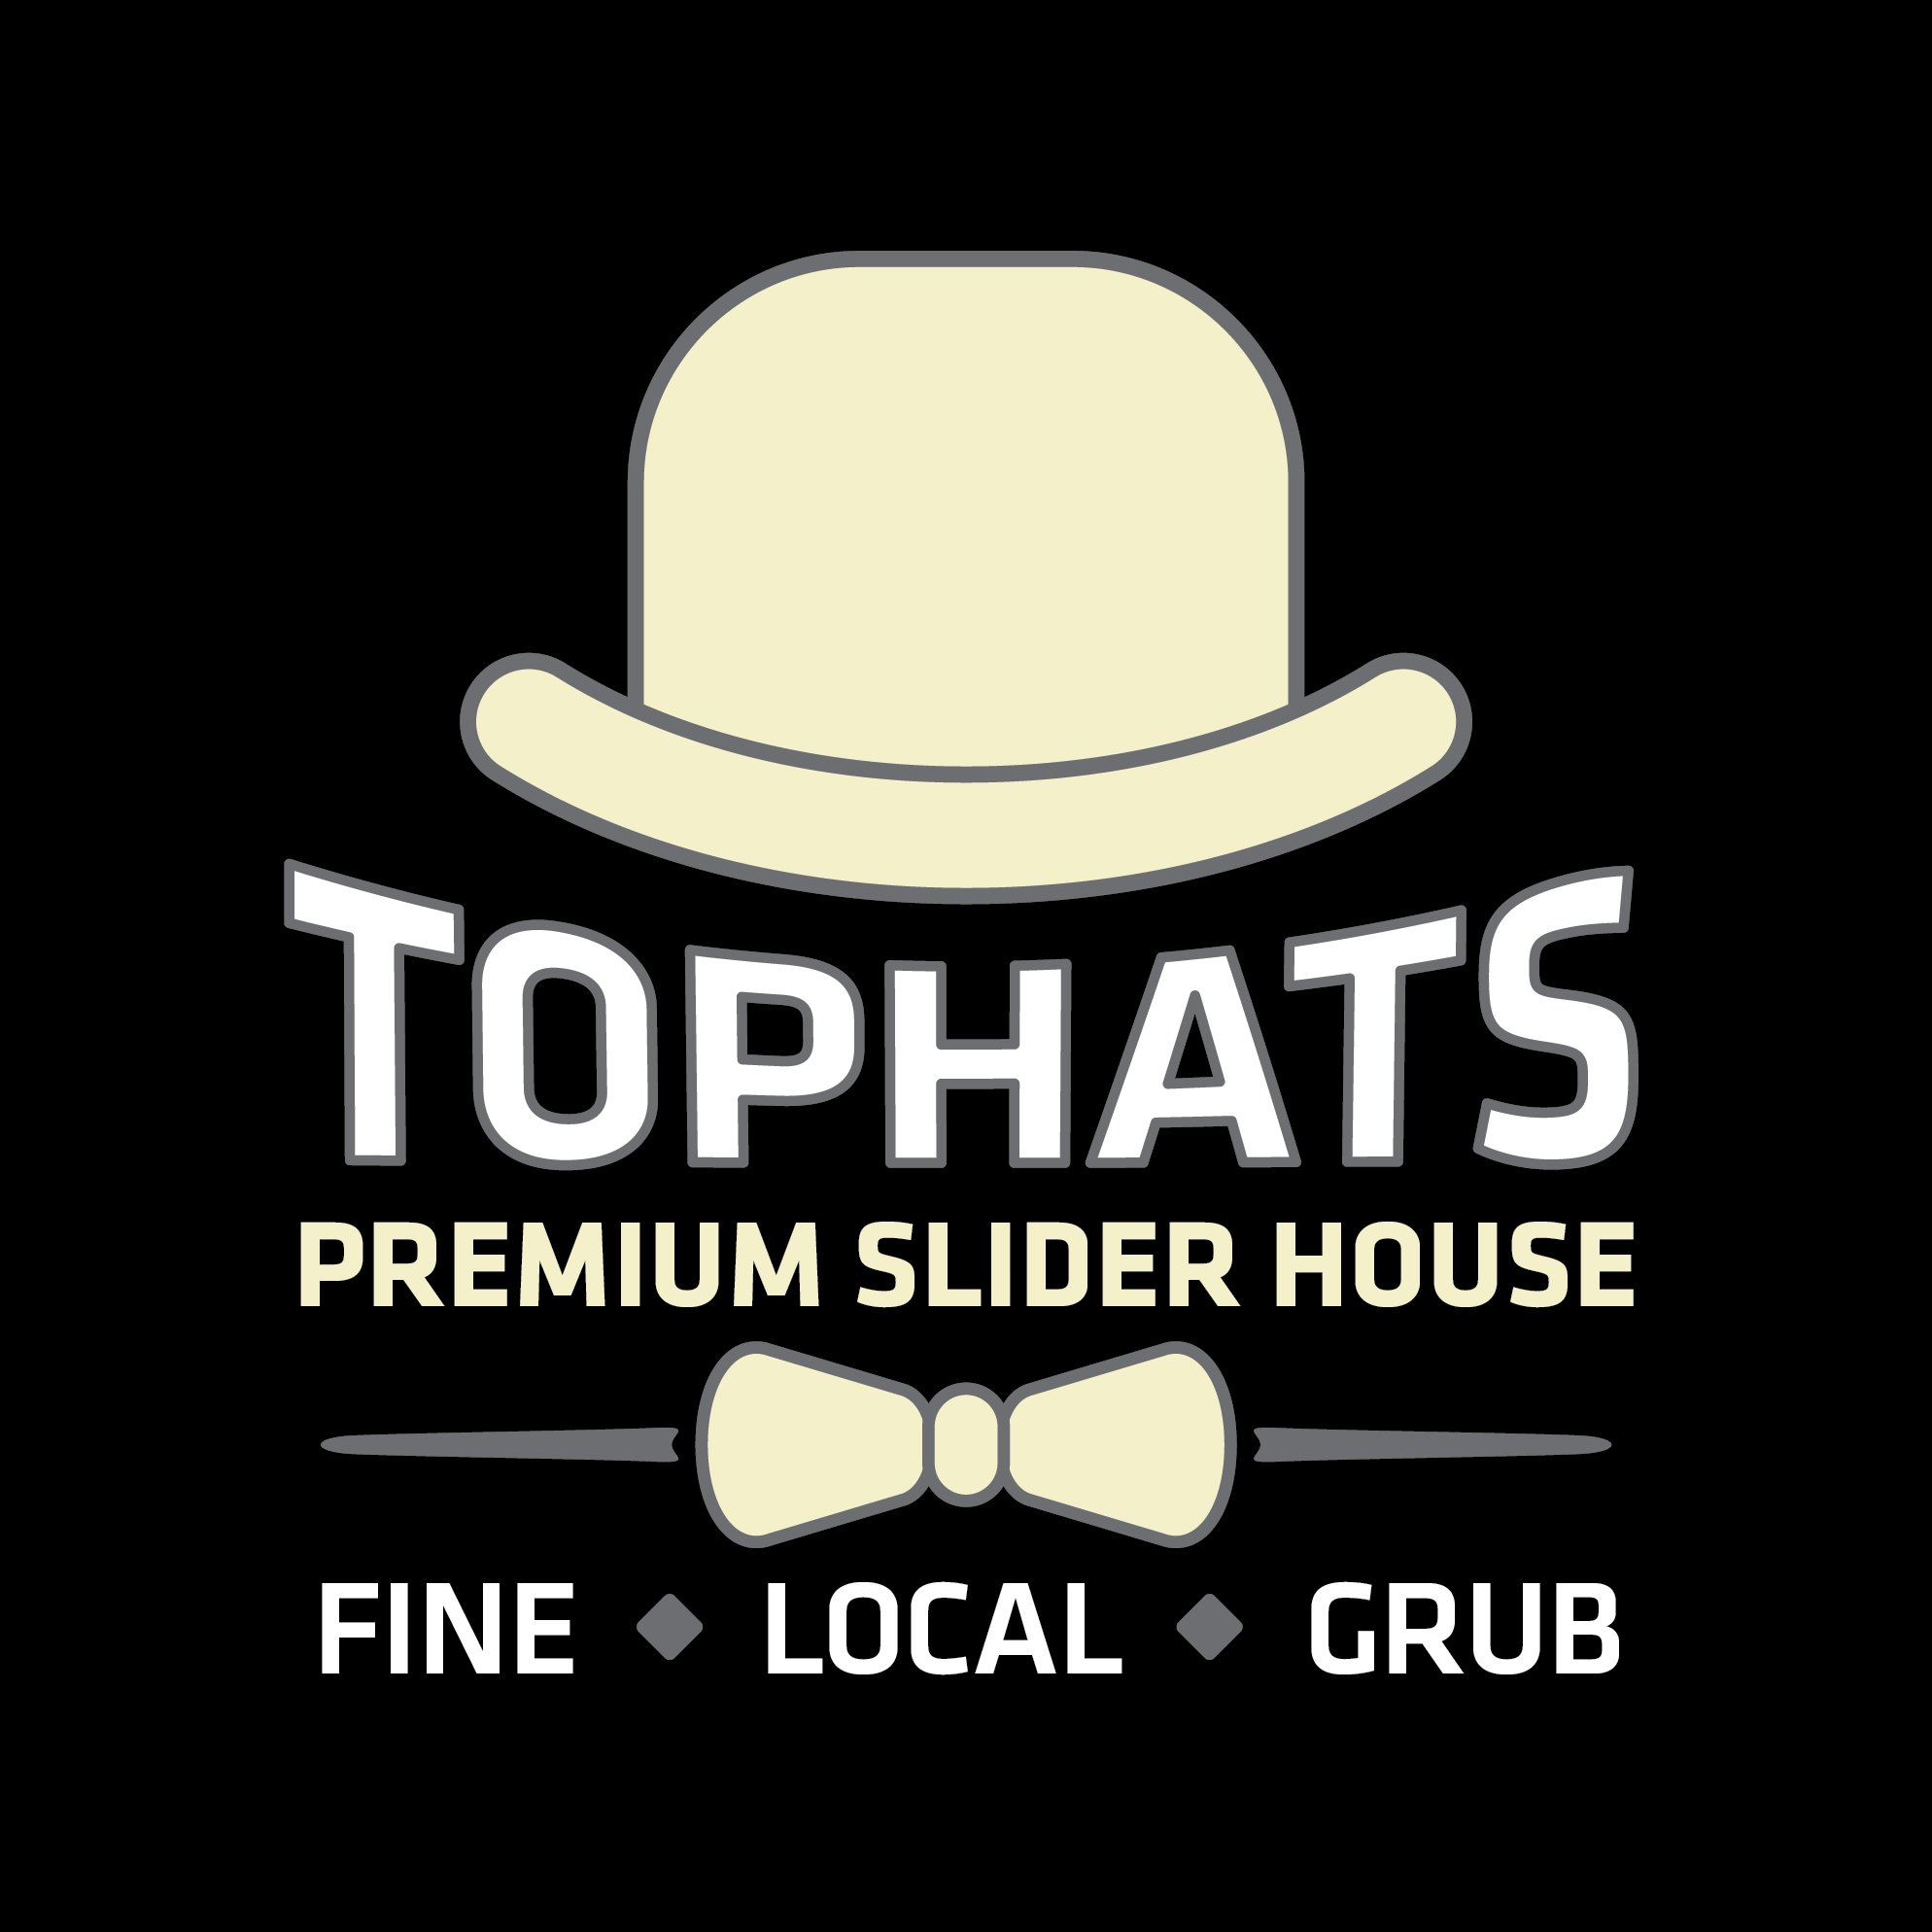 TOPHATS